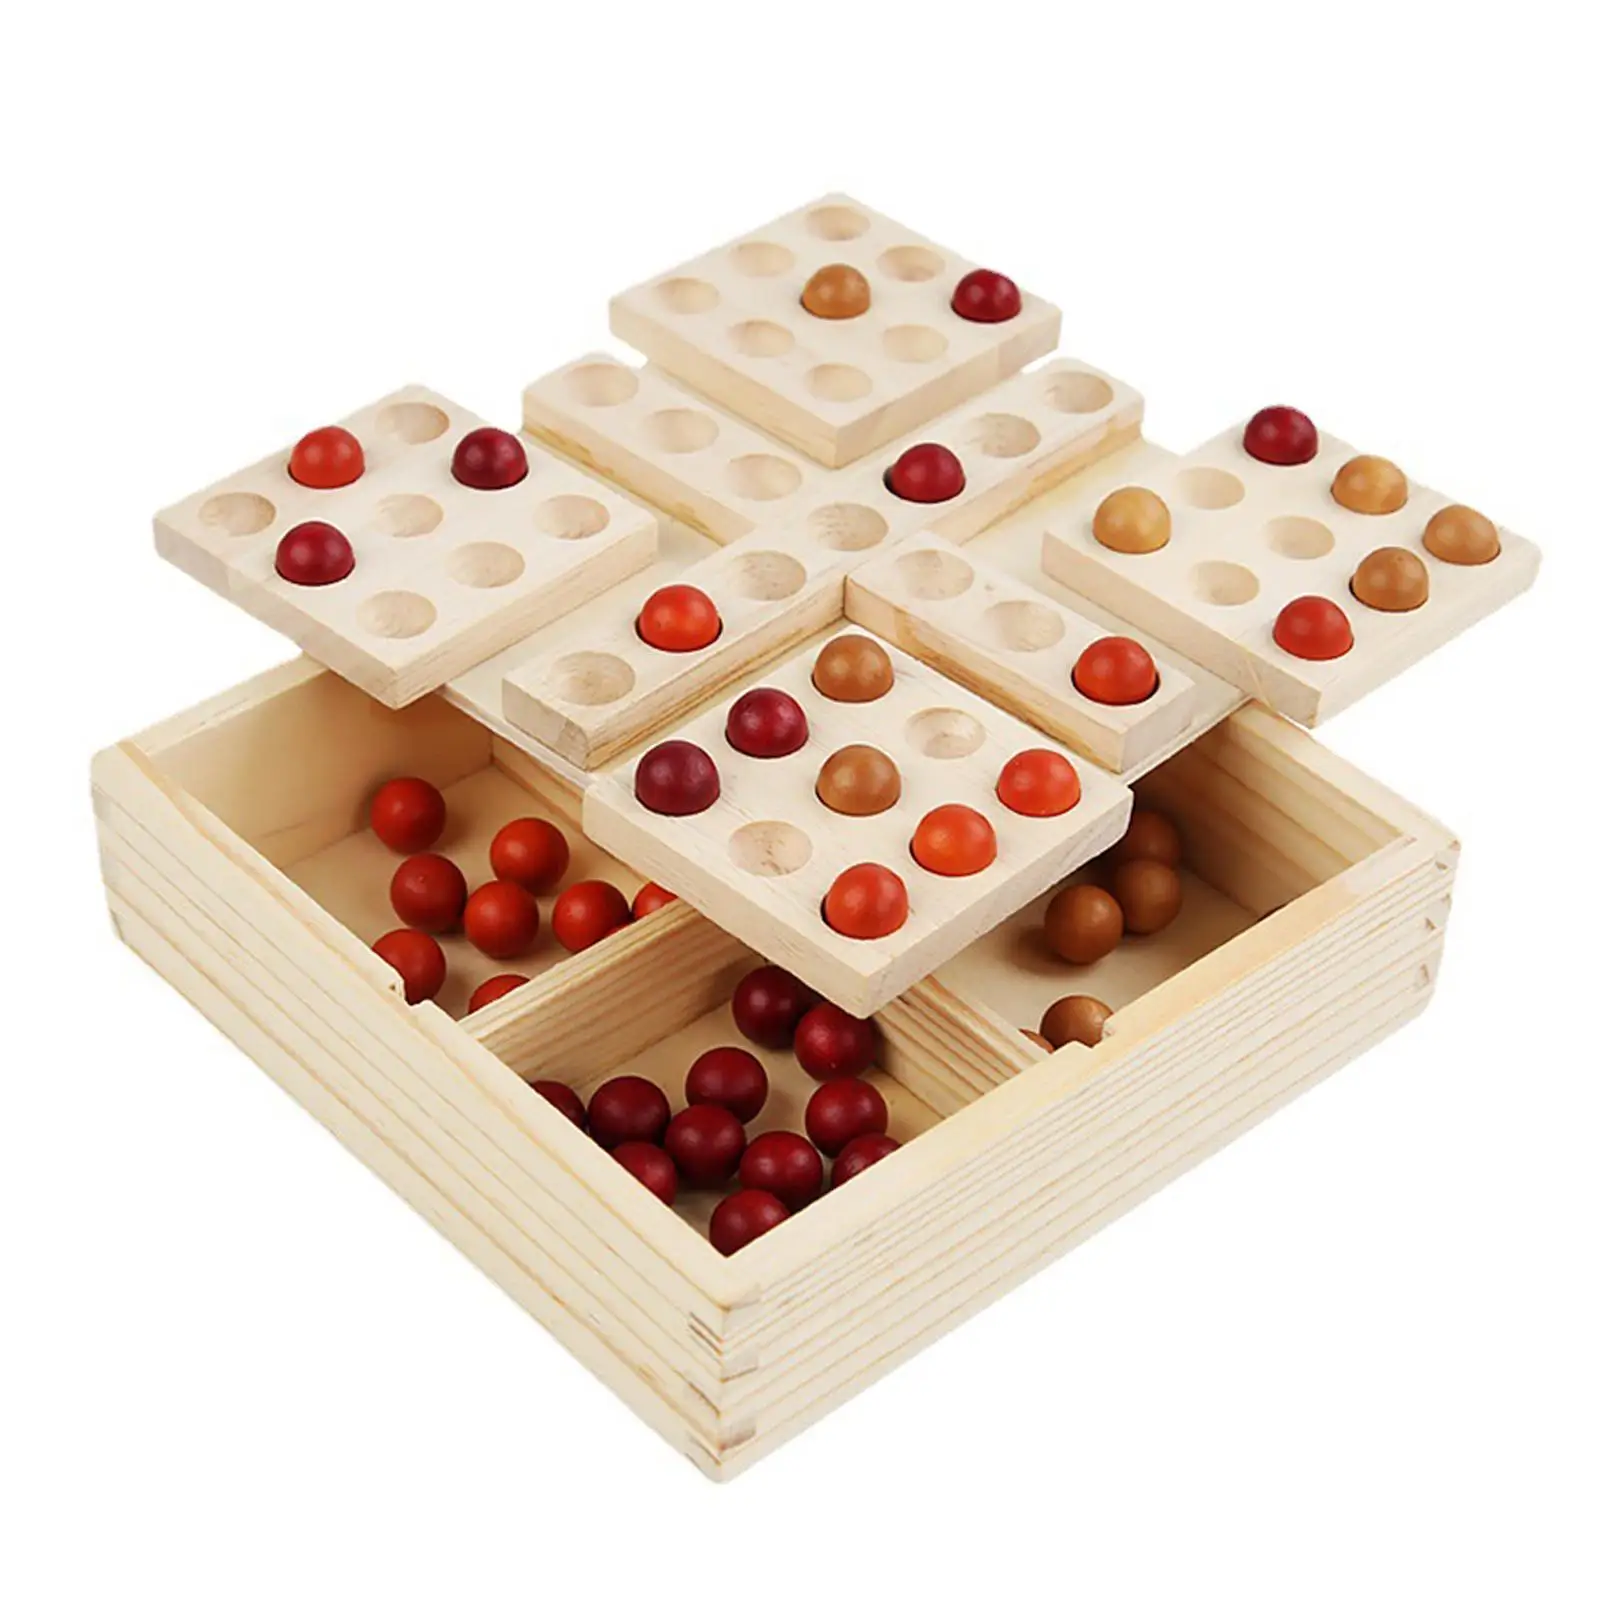 Wood Gobang Chess Puzzle Game Beads Educational Interactive for Gift